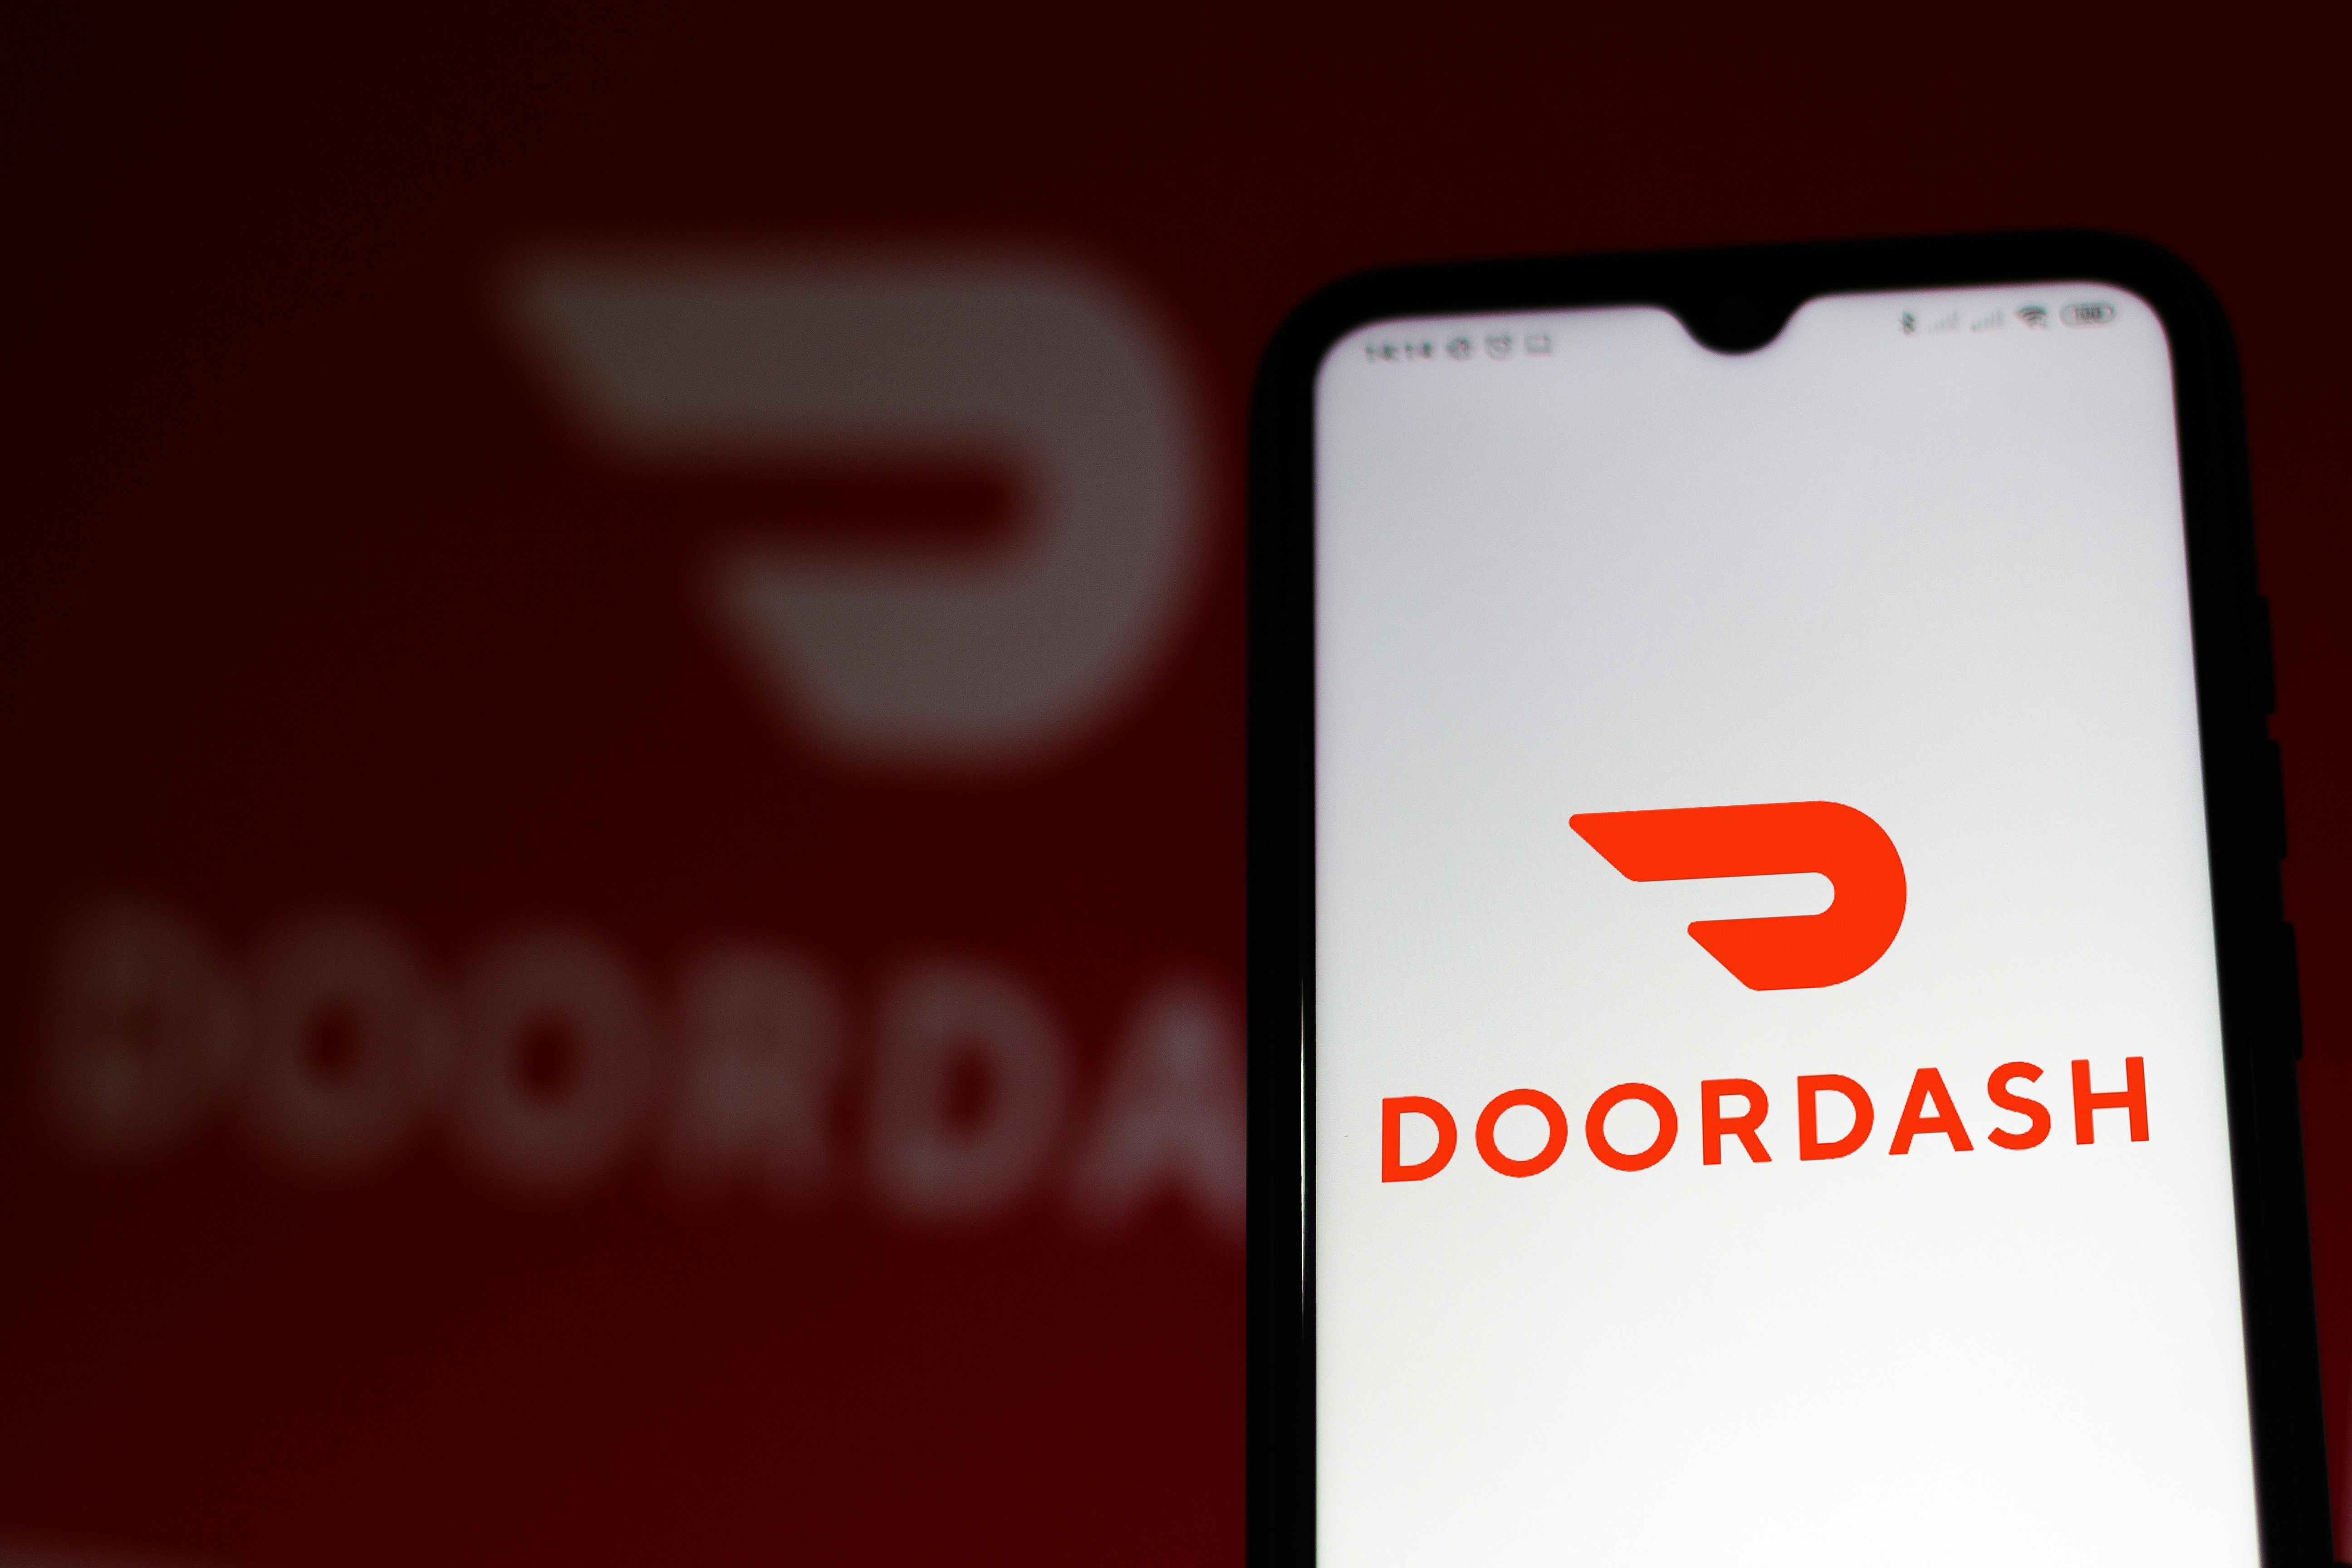 A phone held up showing the doordash app intro image with the doordash logo shown largely in the background of the phone